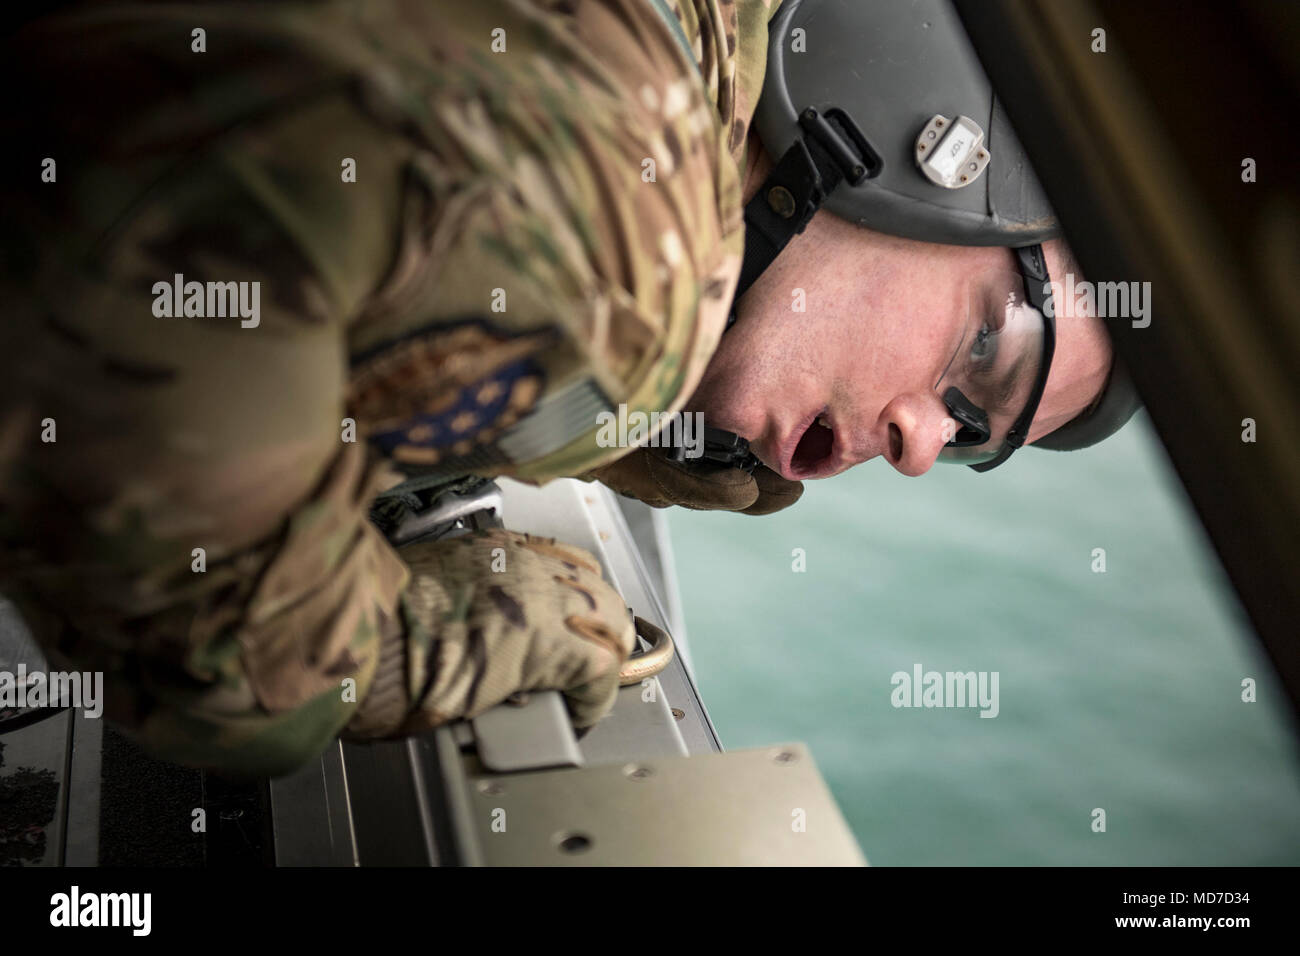 Staff Sgt. James Baker, 71st Rescue Squadron loadmaster, scans the waters below during pyrotechnic employment training, March 30, 2018, in the skies over the Gulf of Mexico. The 71st RQS utilizes various pyrotechnics and sea-dye to assist in over-water rescue efforts. (U.S. Air Force photo by Staff Sgt. Ryan Callaghan) Stock Photo